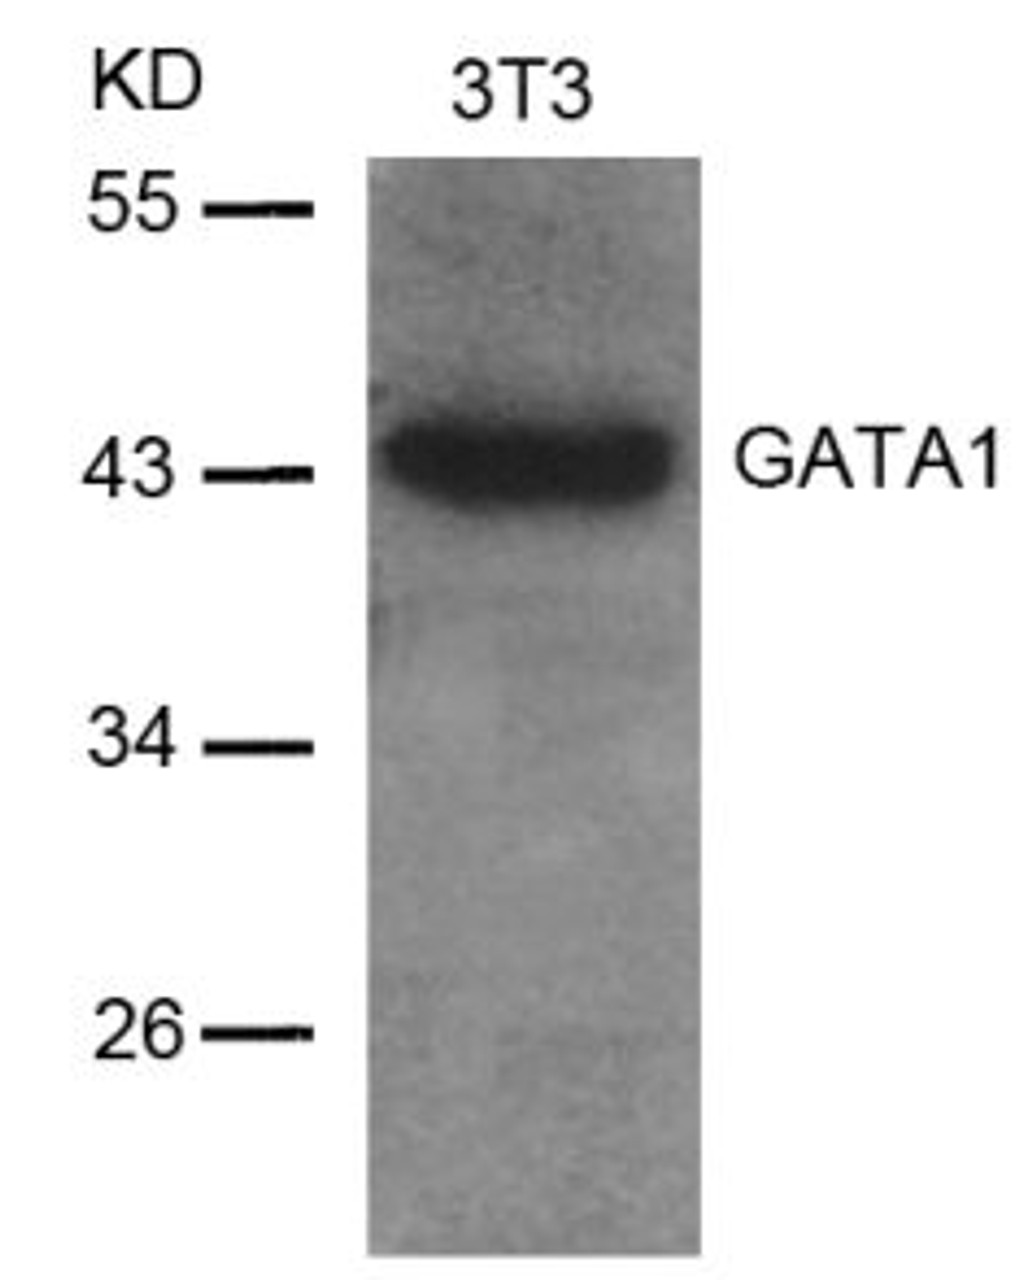 Western blot analysis of lysed extracts from 3T3 cells using GATA1 (Ab-142) .